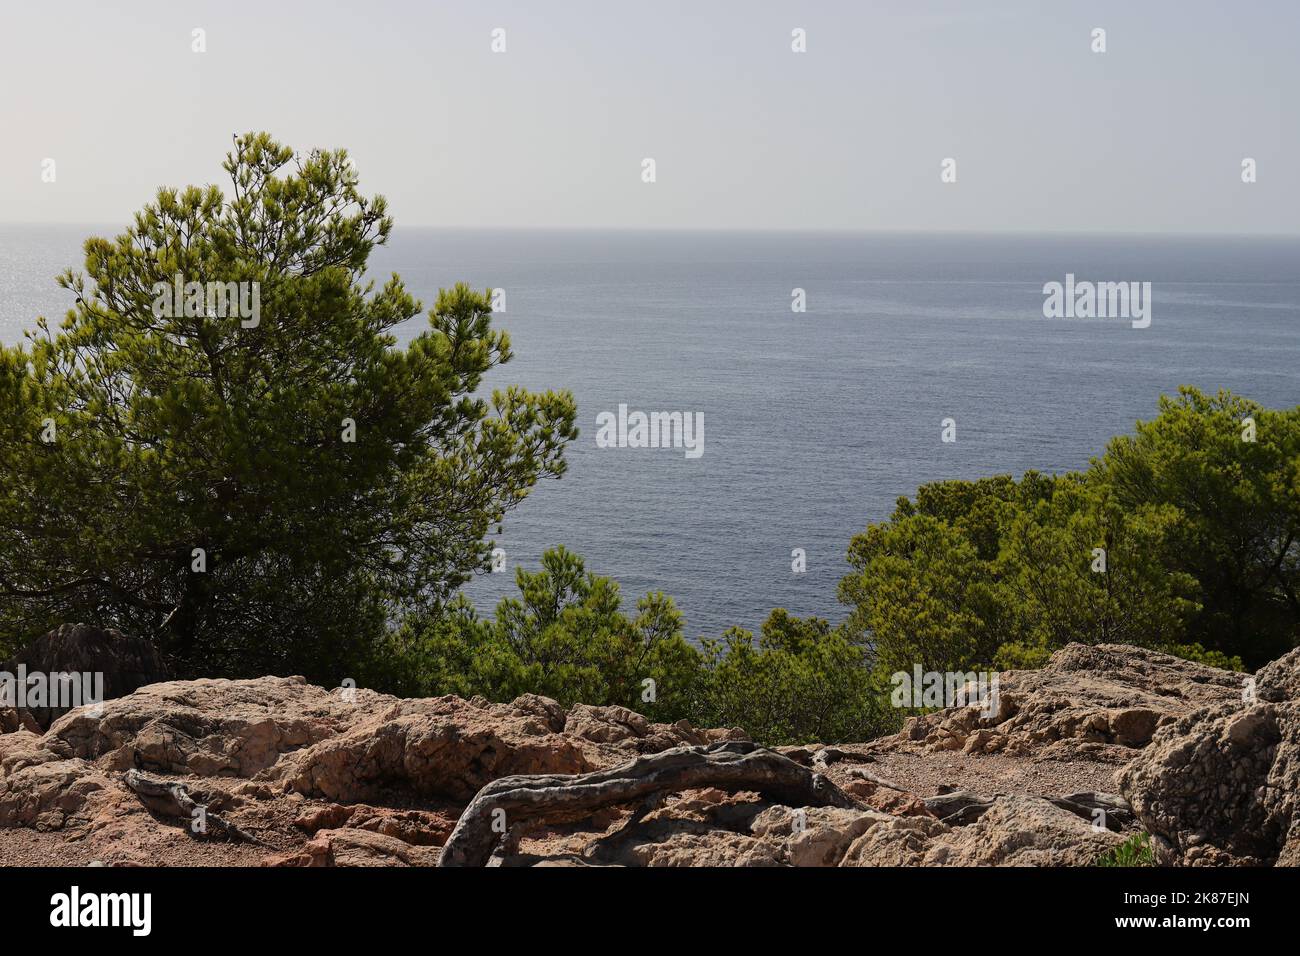 Beautiful view from a hill to the Mediterranean Sea at Cala Ratjada, copy space Stock Photo